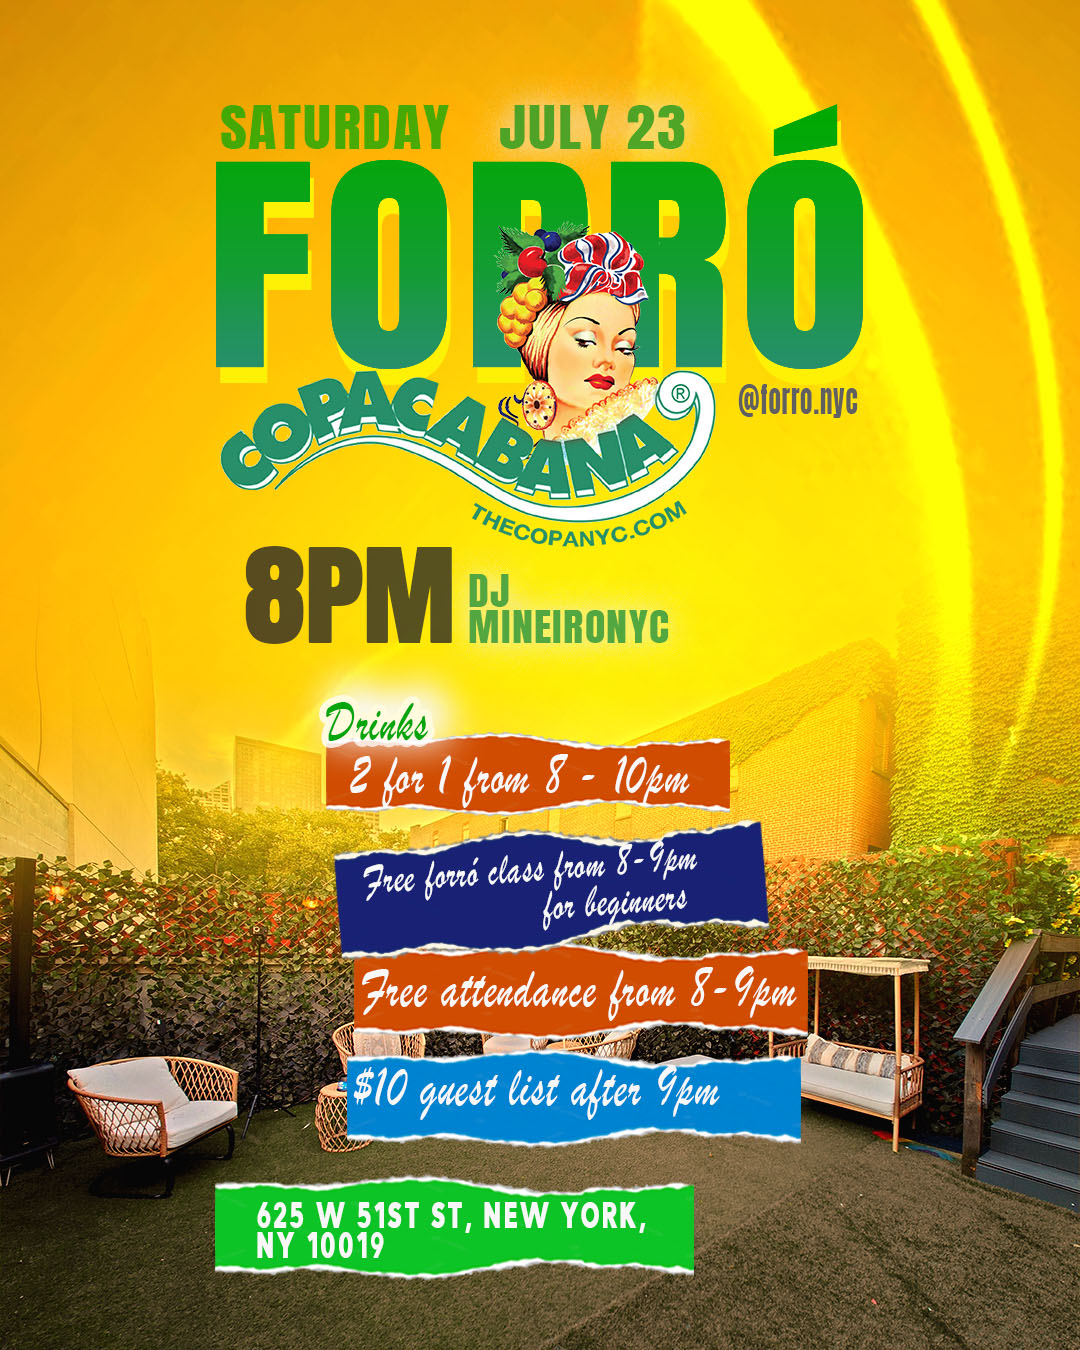 Forró in NYC, Forró in New York - Forró Copacabana, July 23rd at 8PM